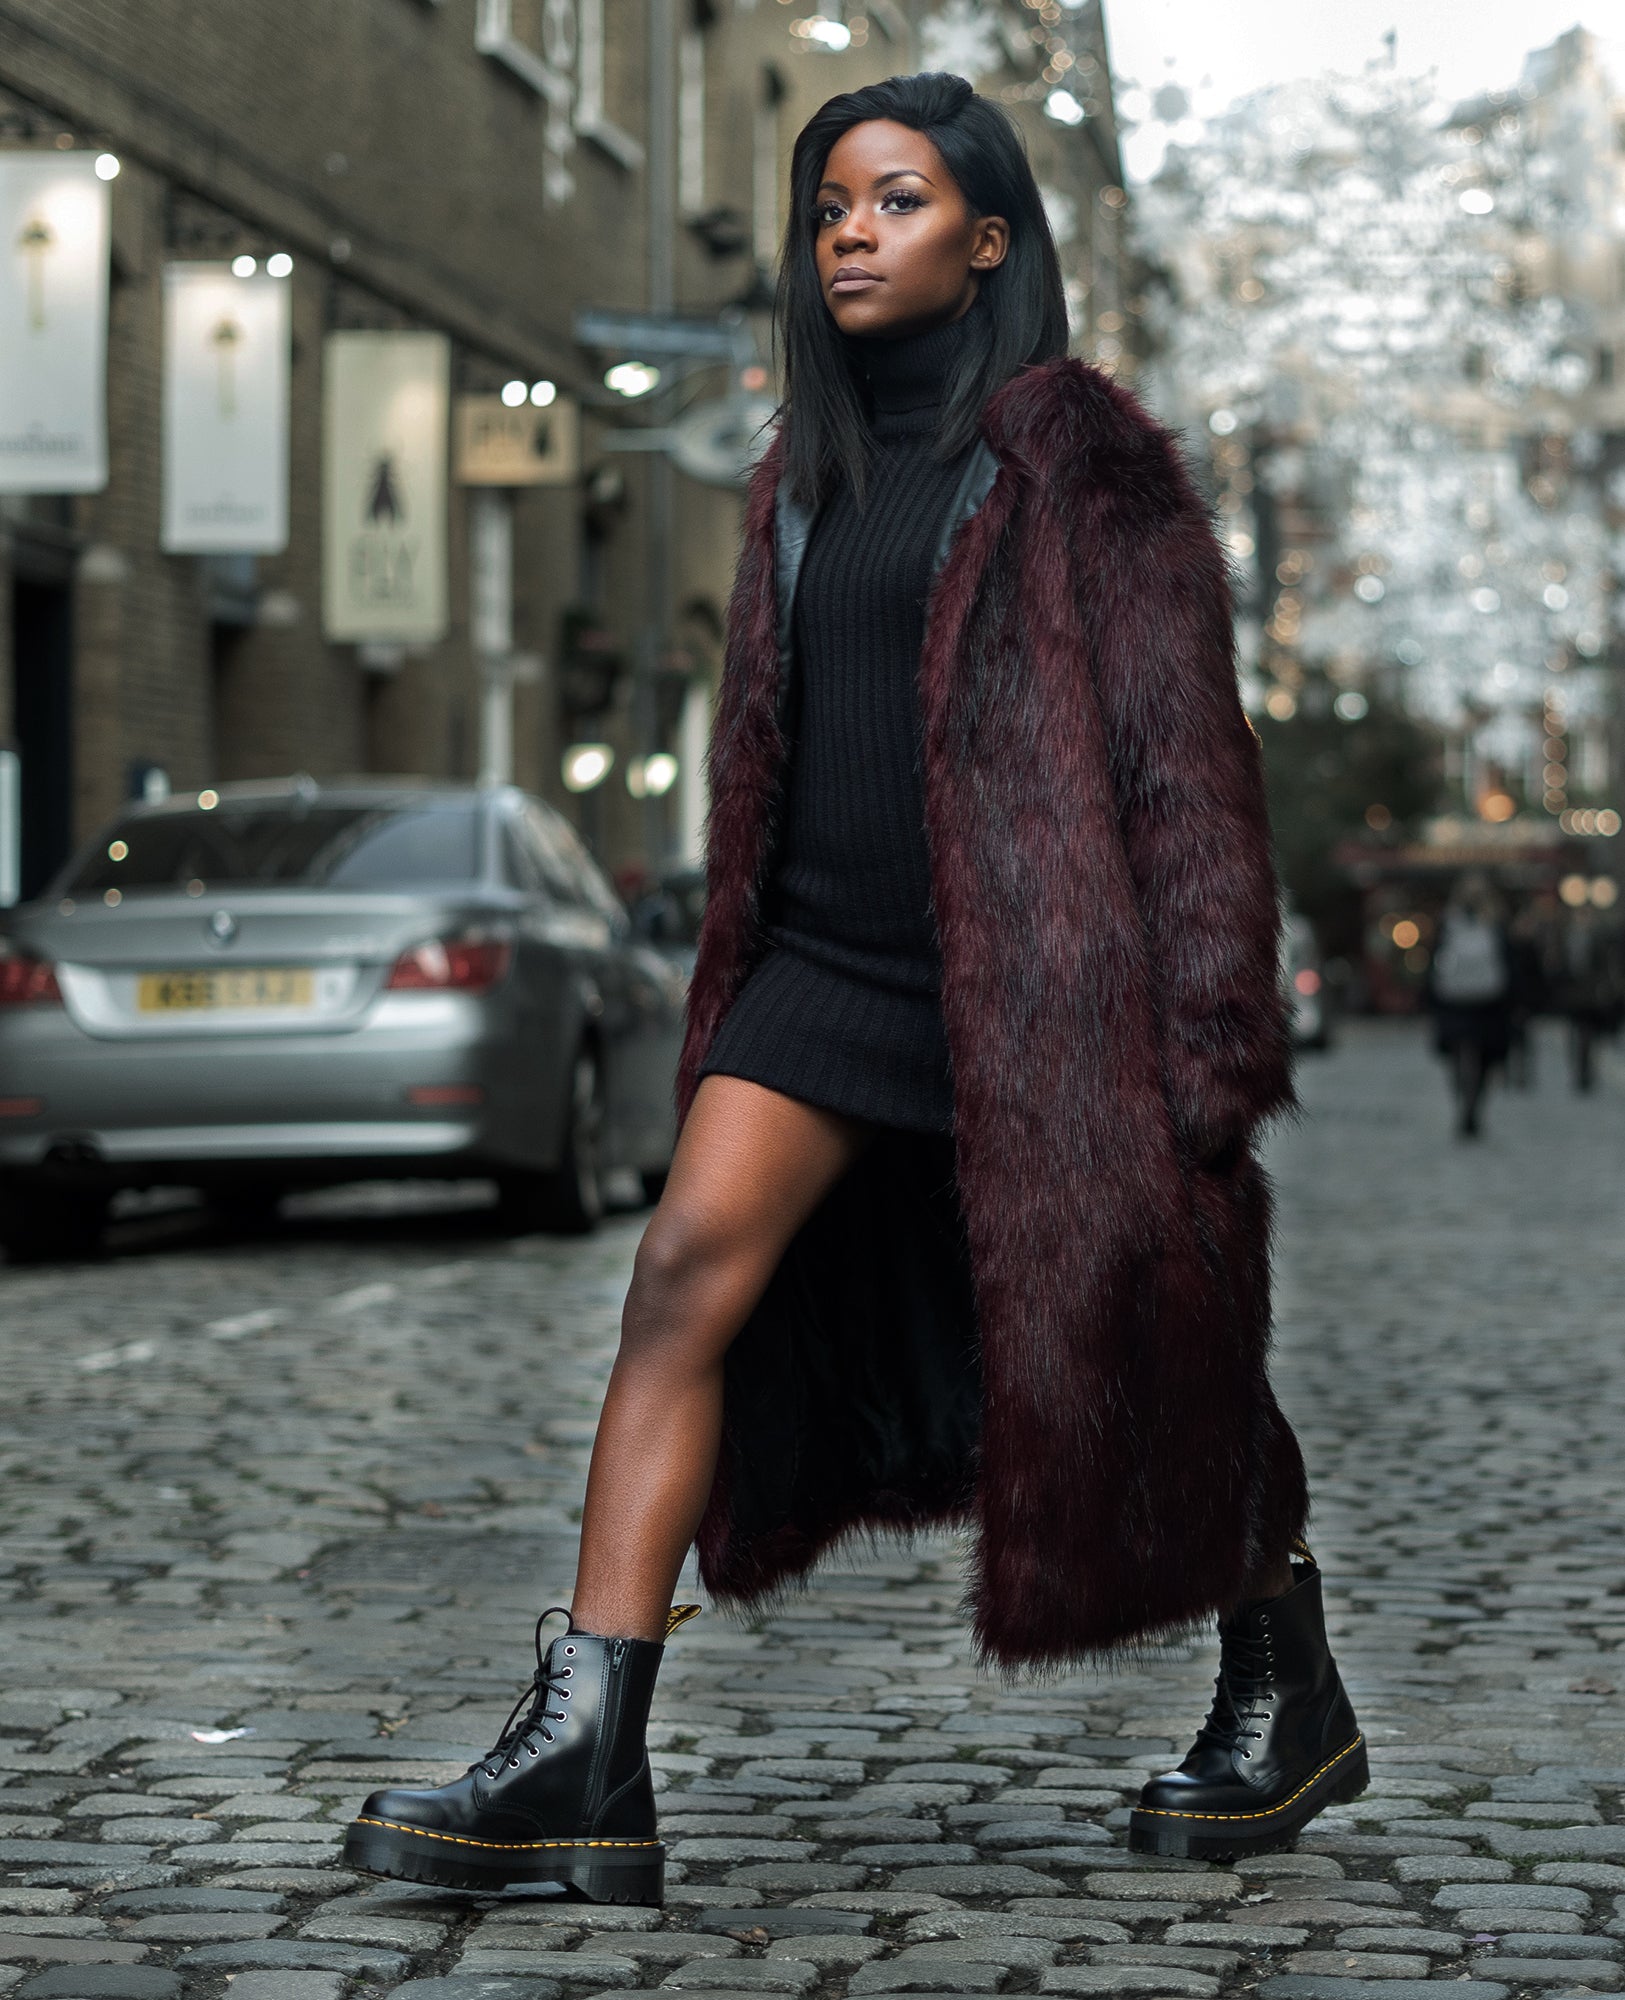 Statement Coats: Defying the Cold with Style